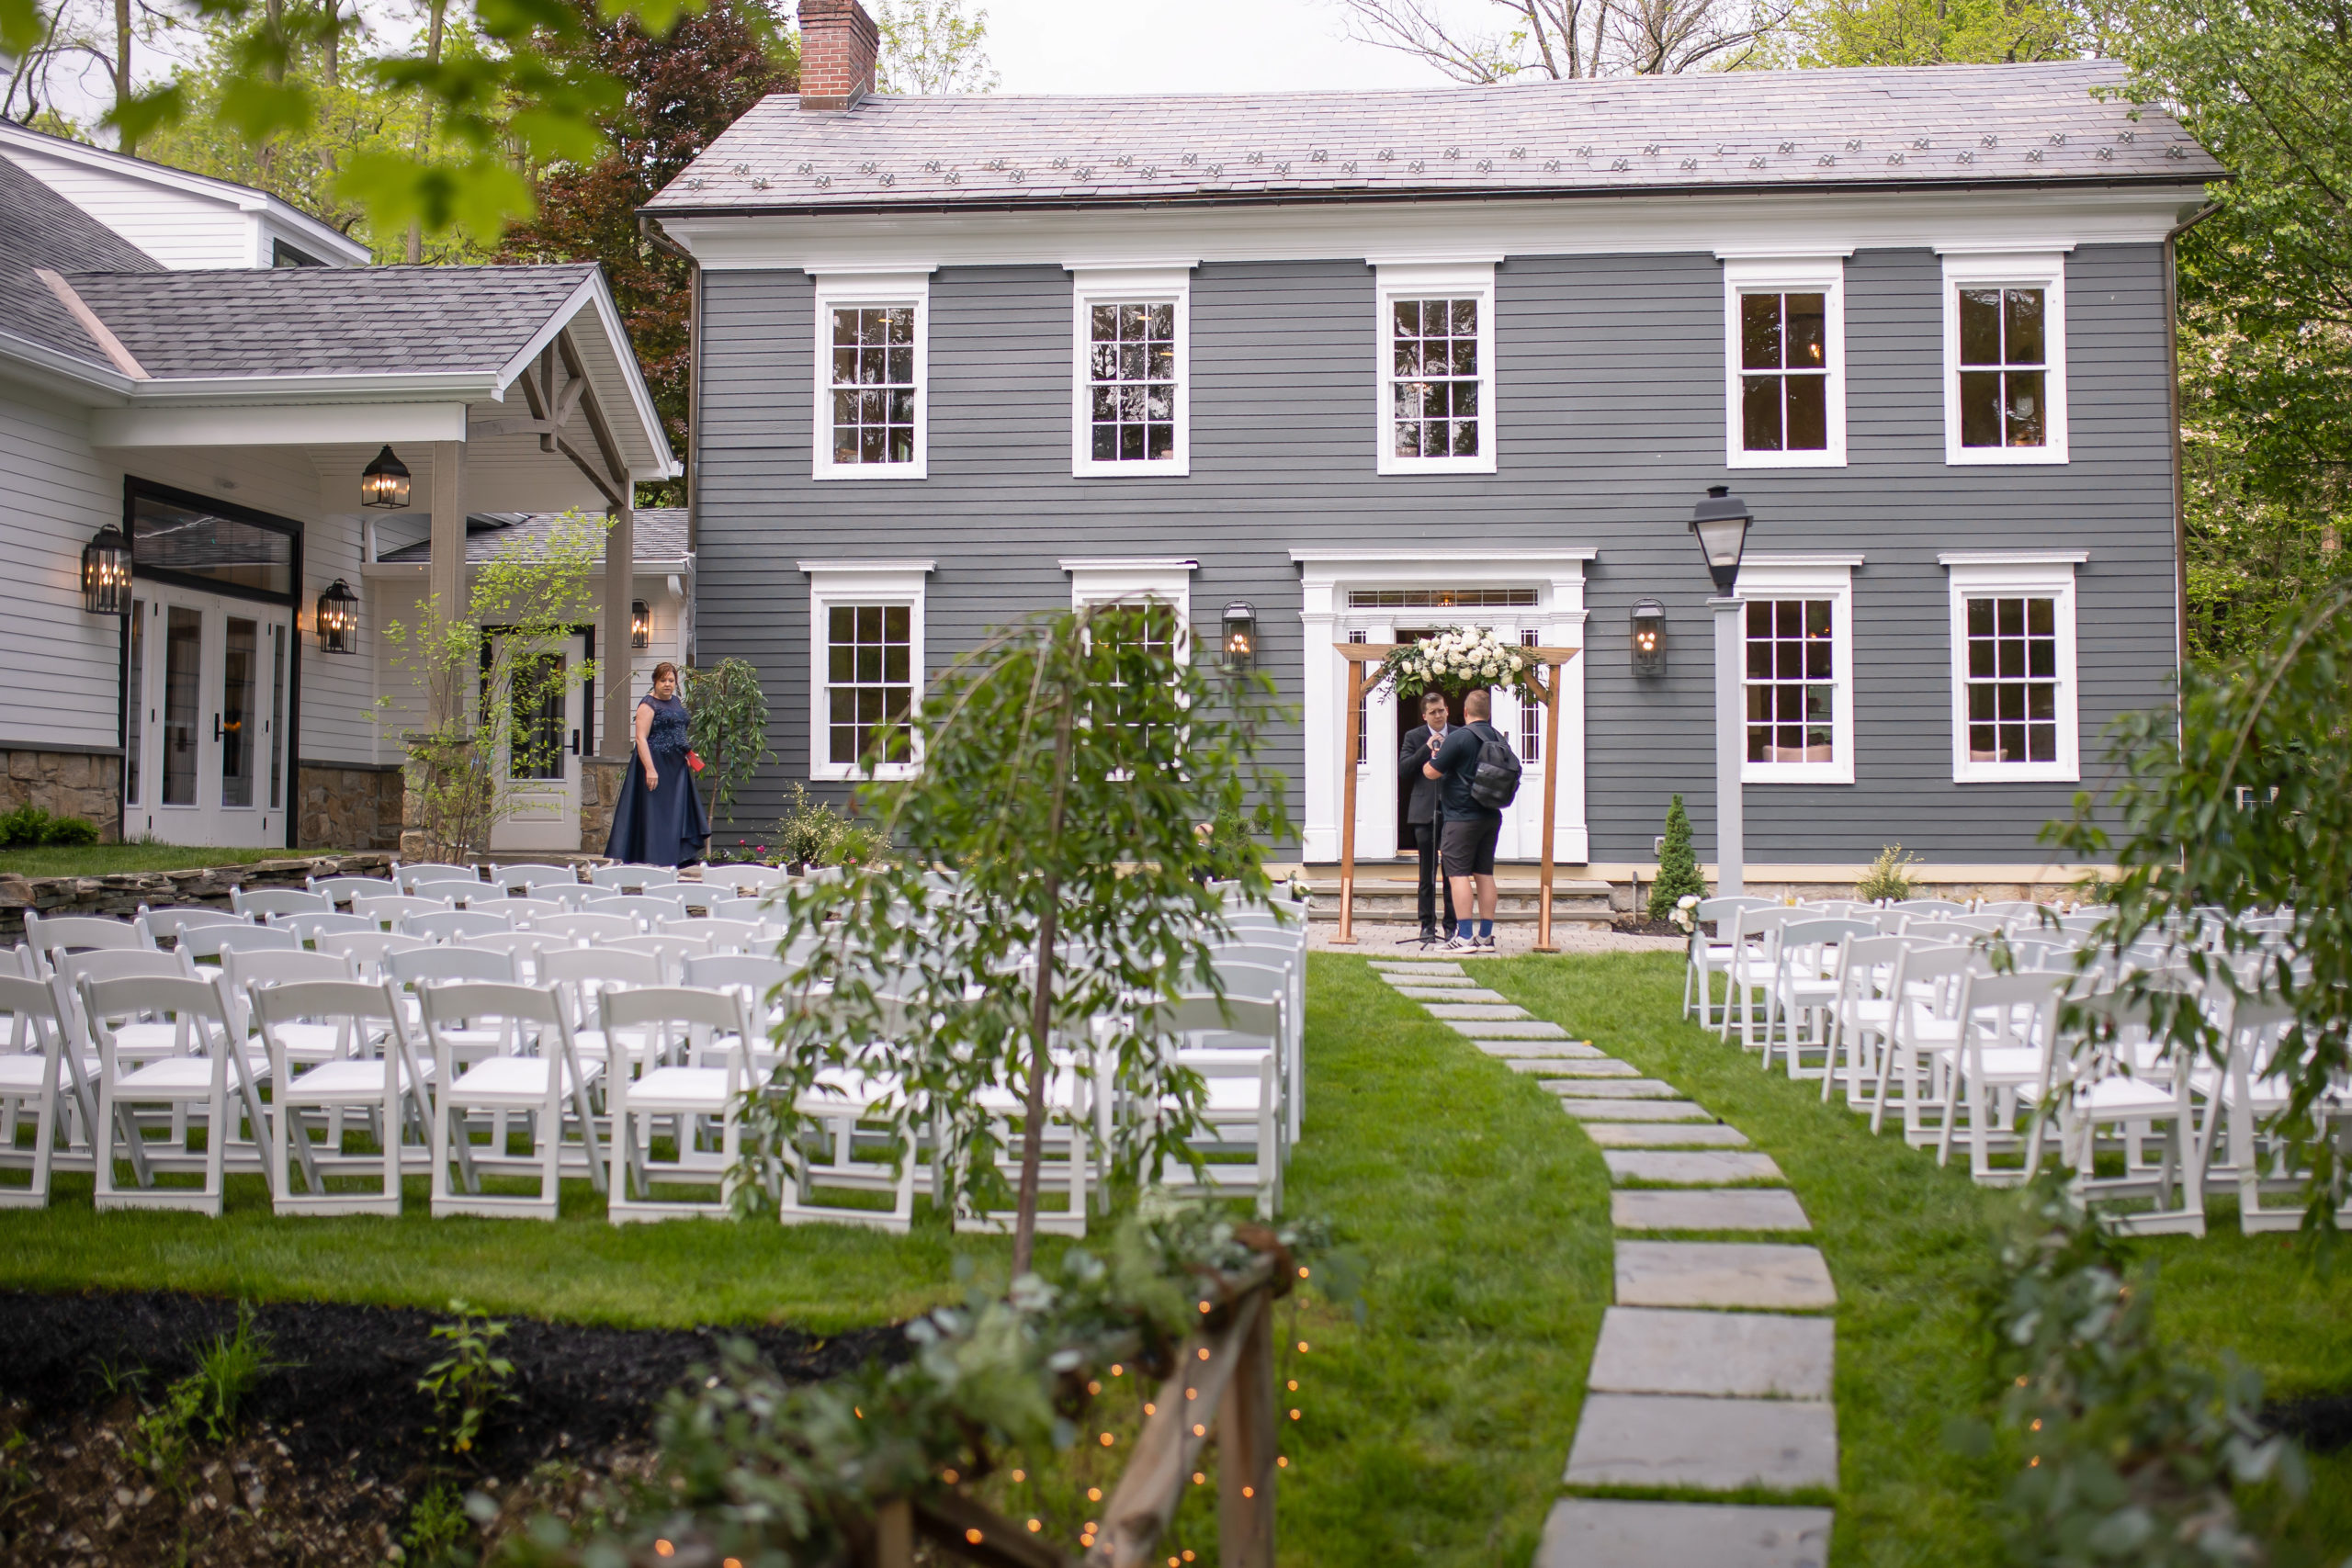 A wedding at the Inn at Millrace Pond, a wedding venue in New Jersey.